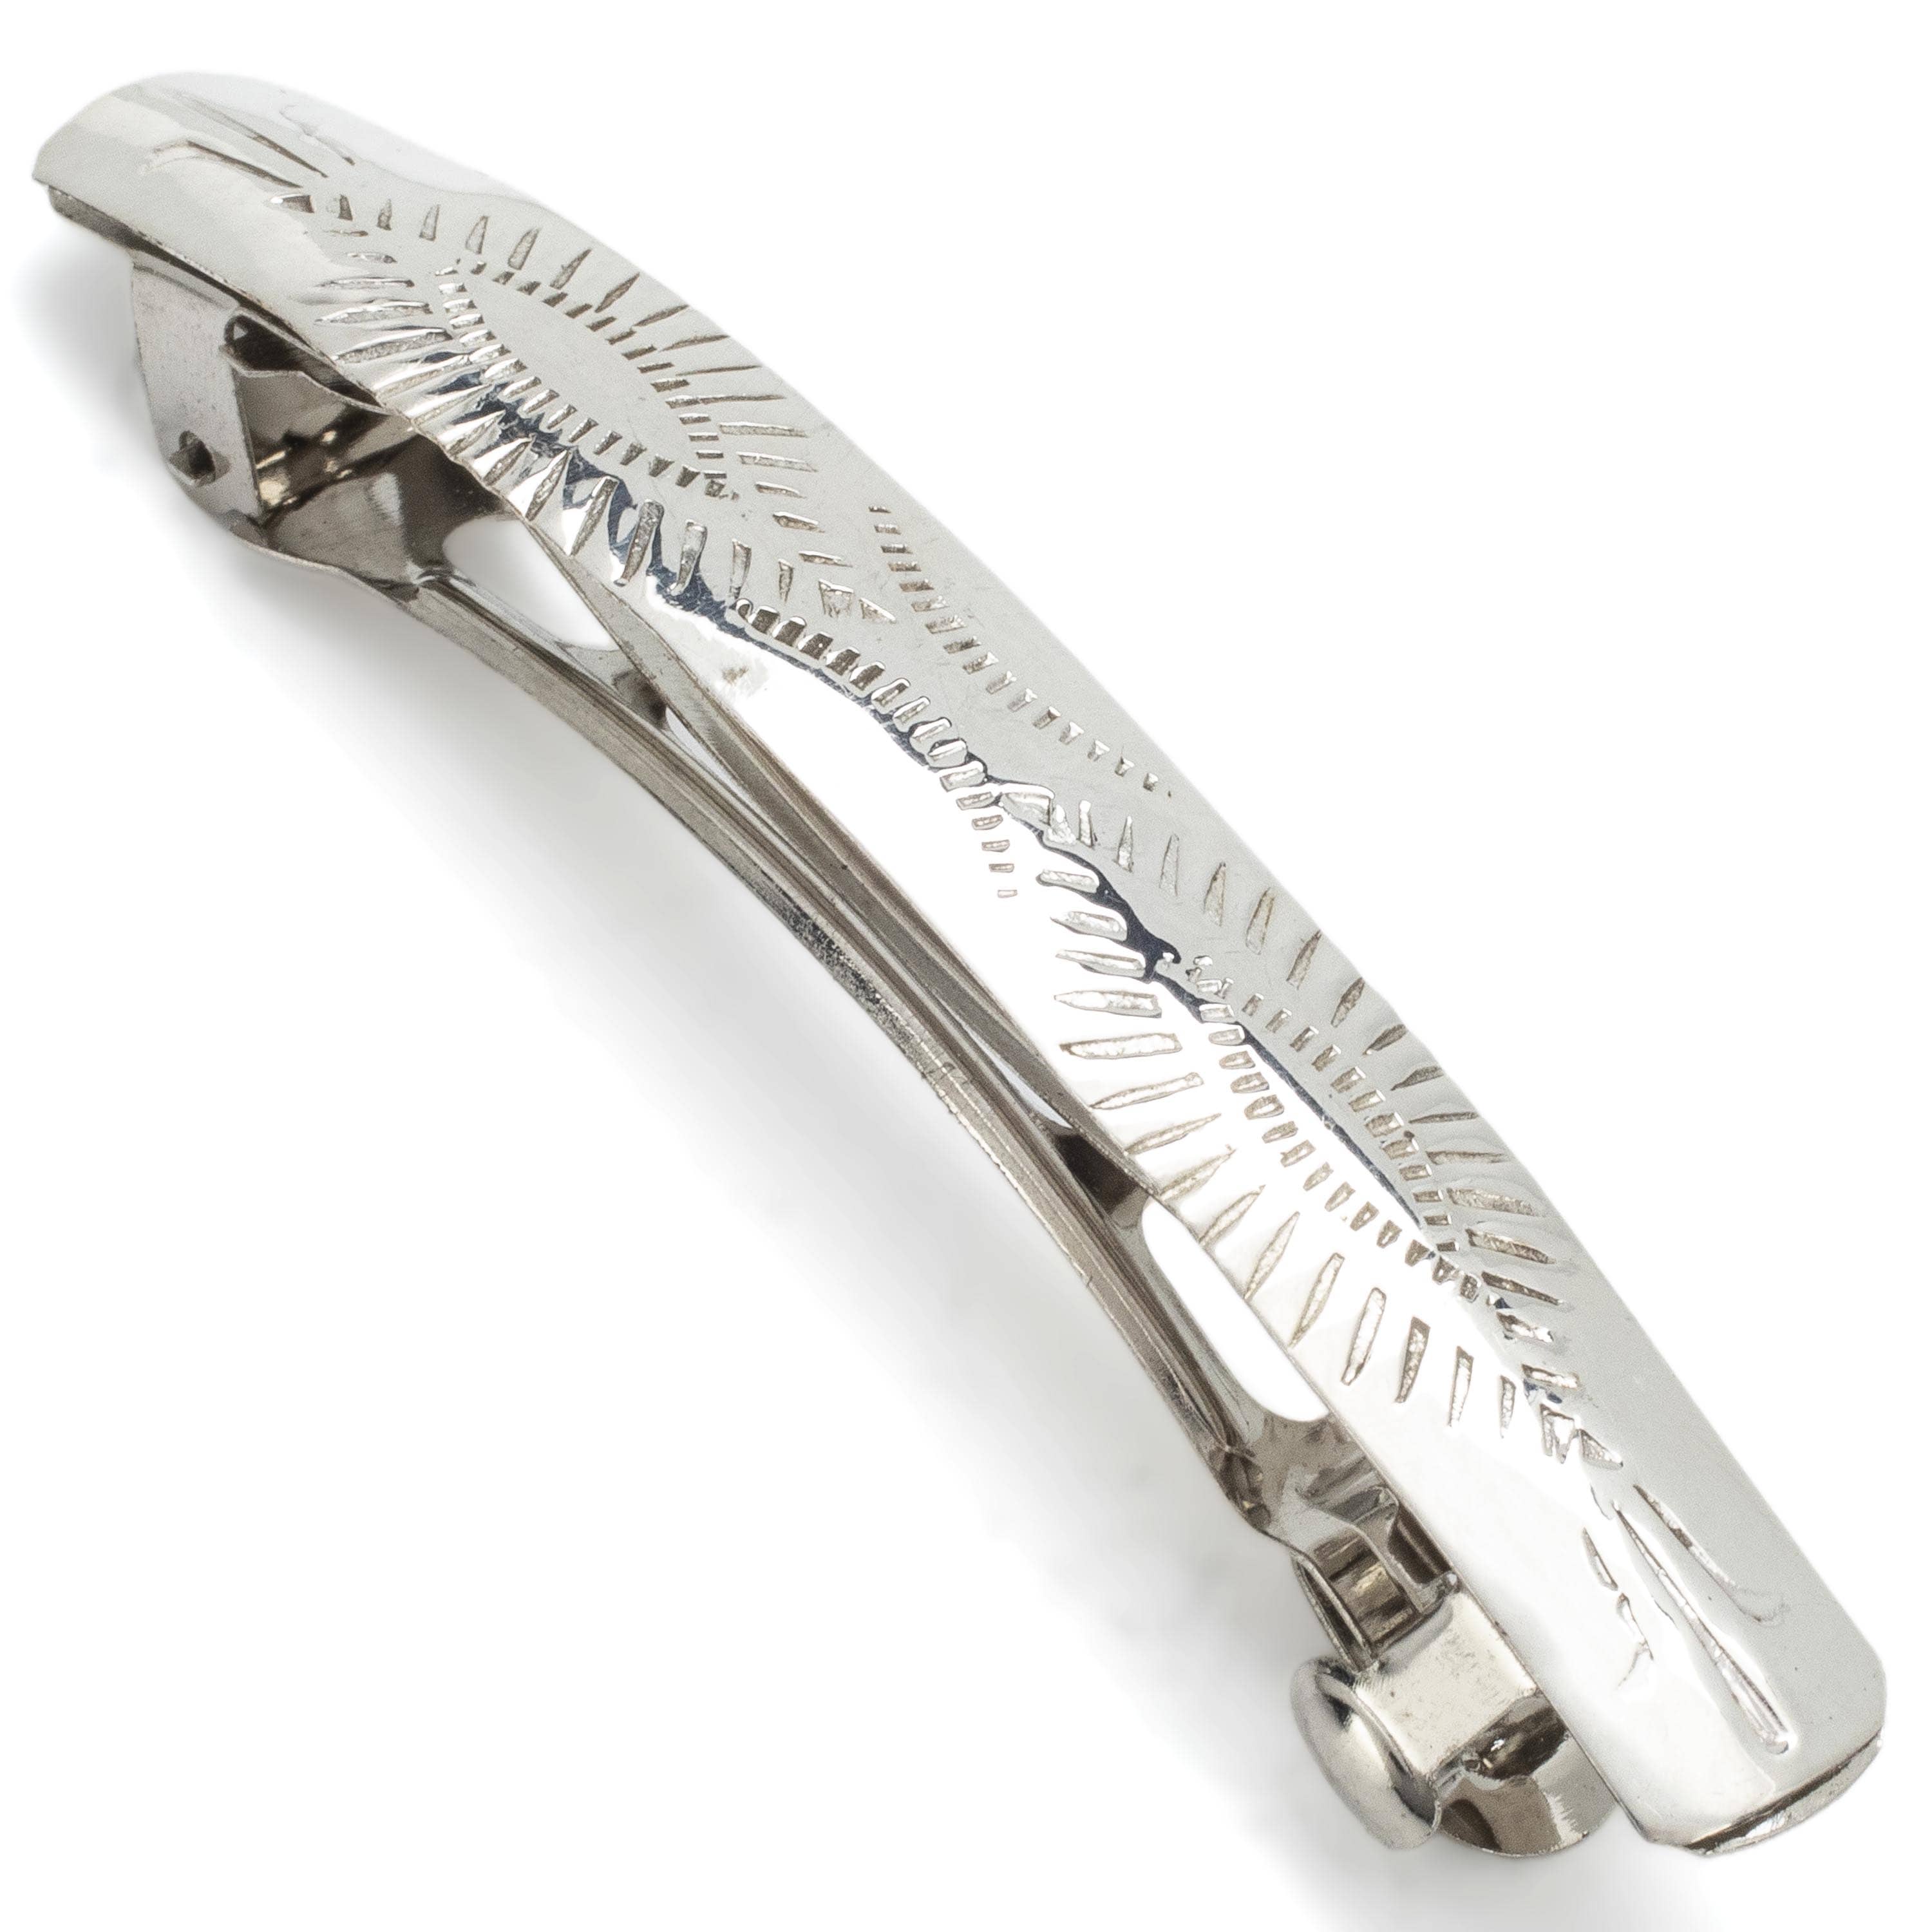 Kalifano Native American Jewelry 925 Sterling Silver USA Native American Made Hair Clip NA150.013